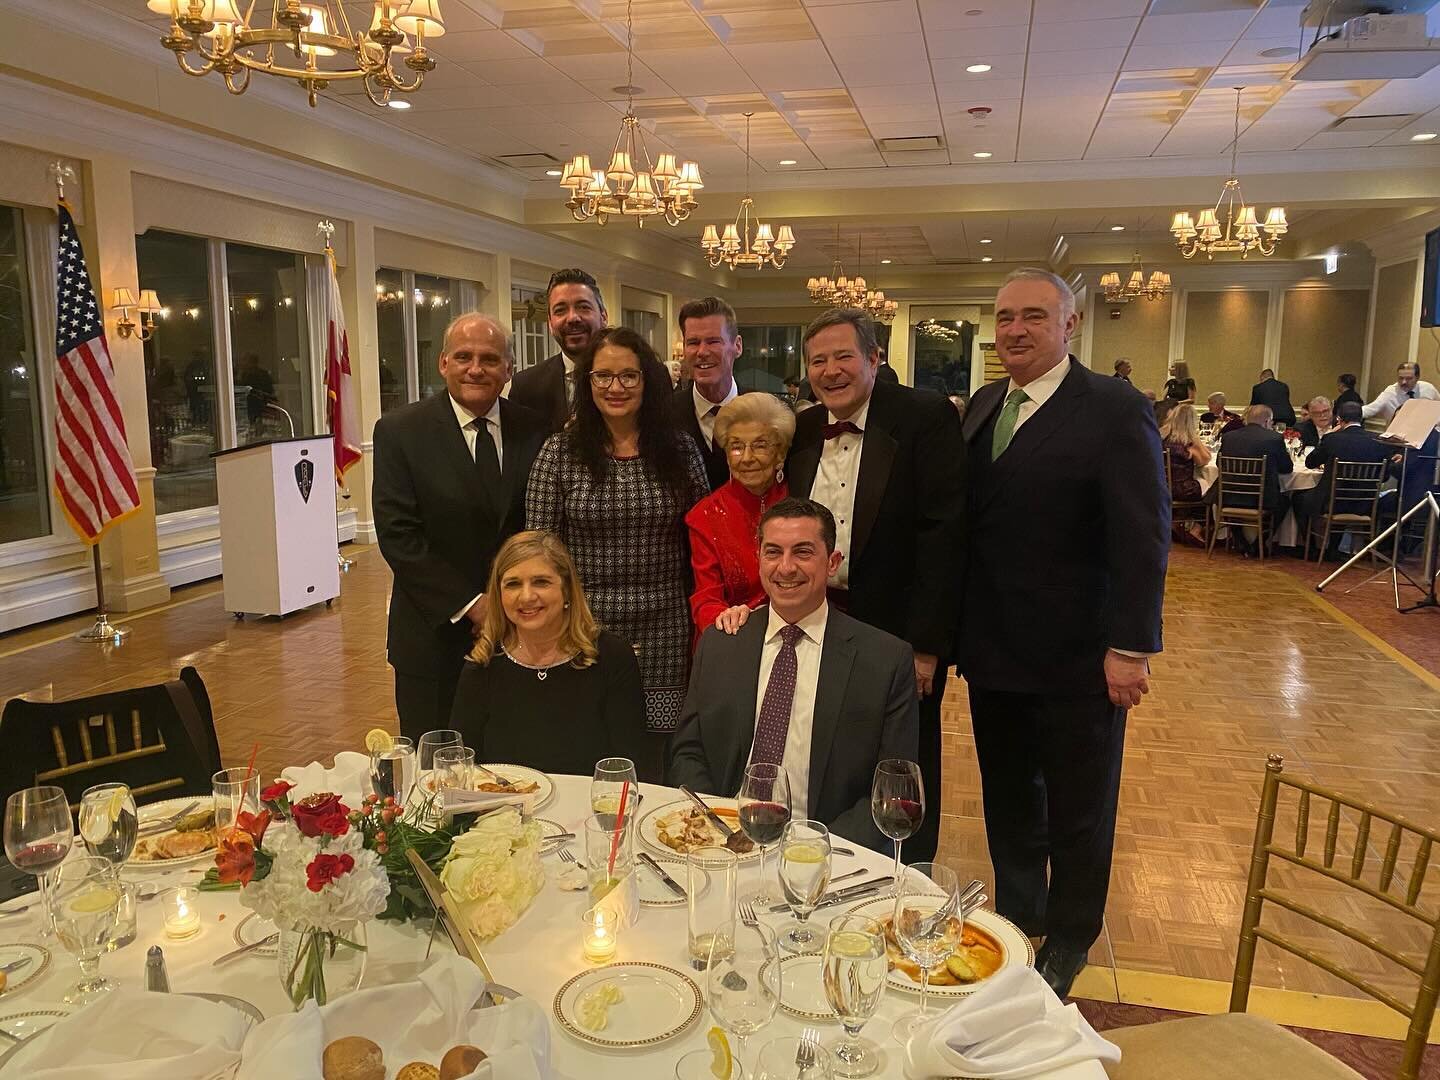 Is was honored to be the guest of the guest of honor, my boss Traffic&rsquo;s Presiding Judge Diann Marsalek, at the Chicago Society of Polish National Alliance&rsquo;s annual banquet. Thank you Judge Marsalek for your continued support and congratul